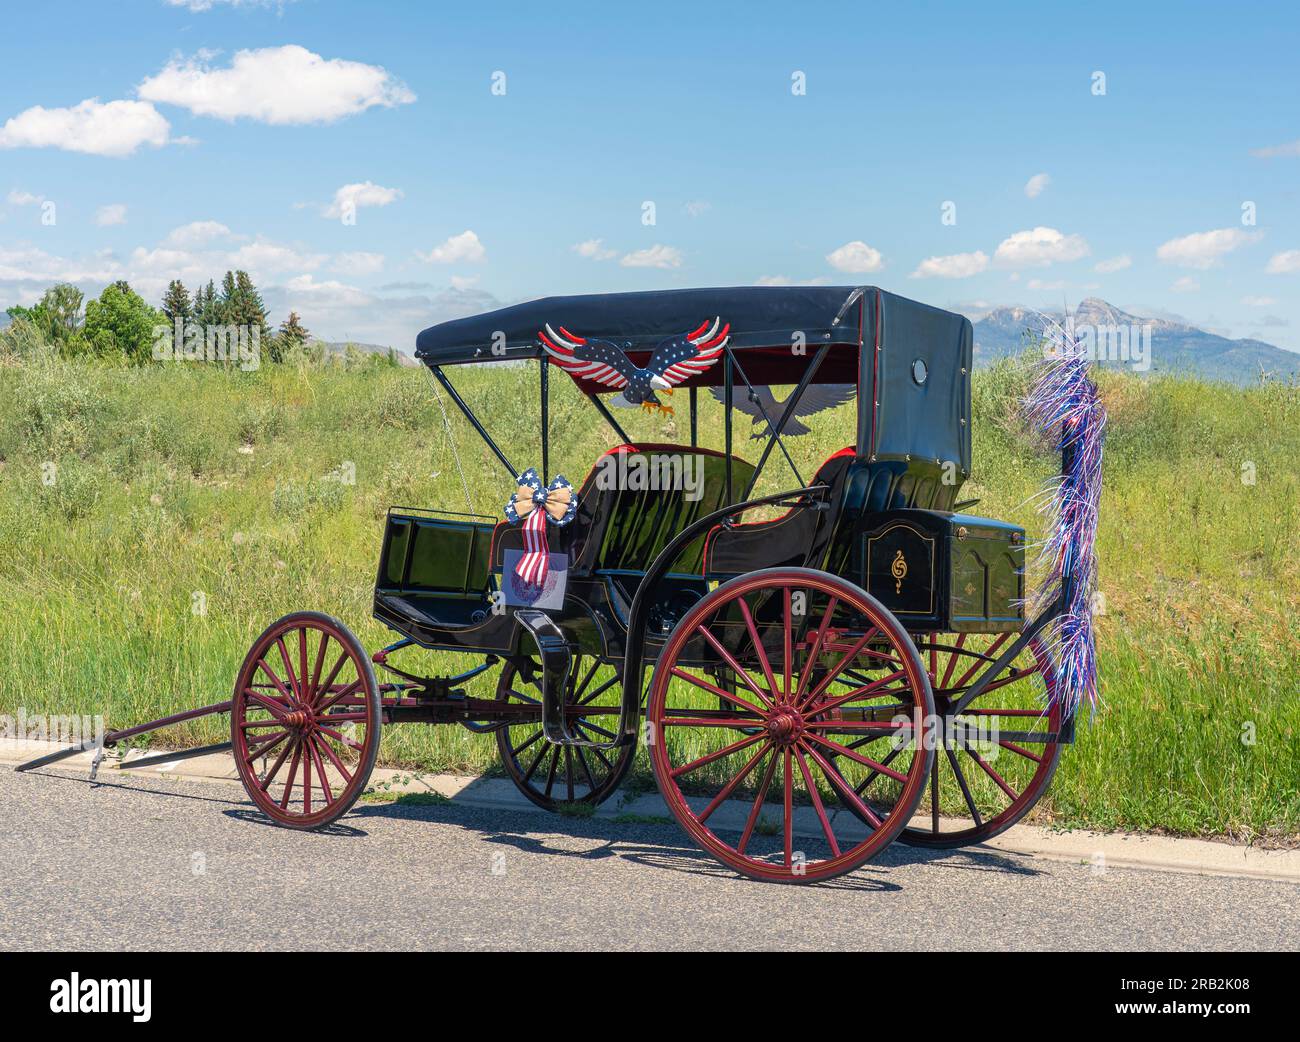 Surrey carriage over 100 years old near field & mountain background is parked & decorated in USA red, white, & blue. See 2 bench seats & red wheels. Stock Photo